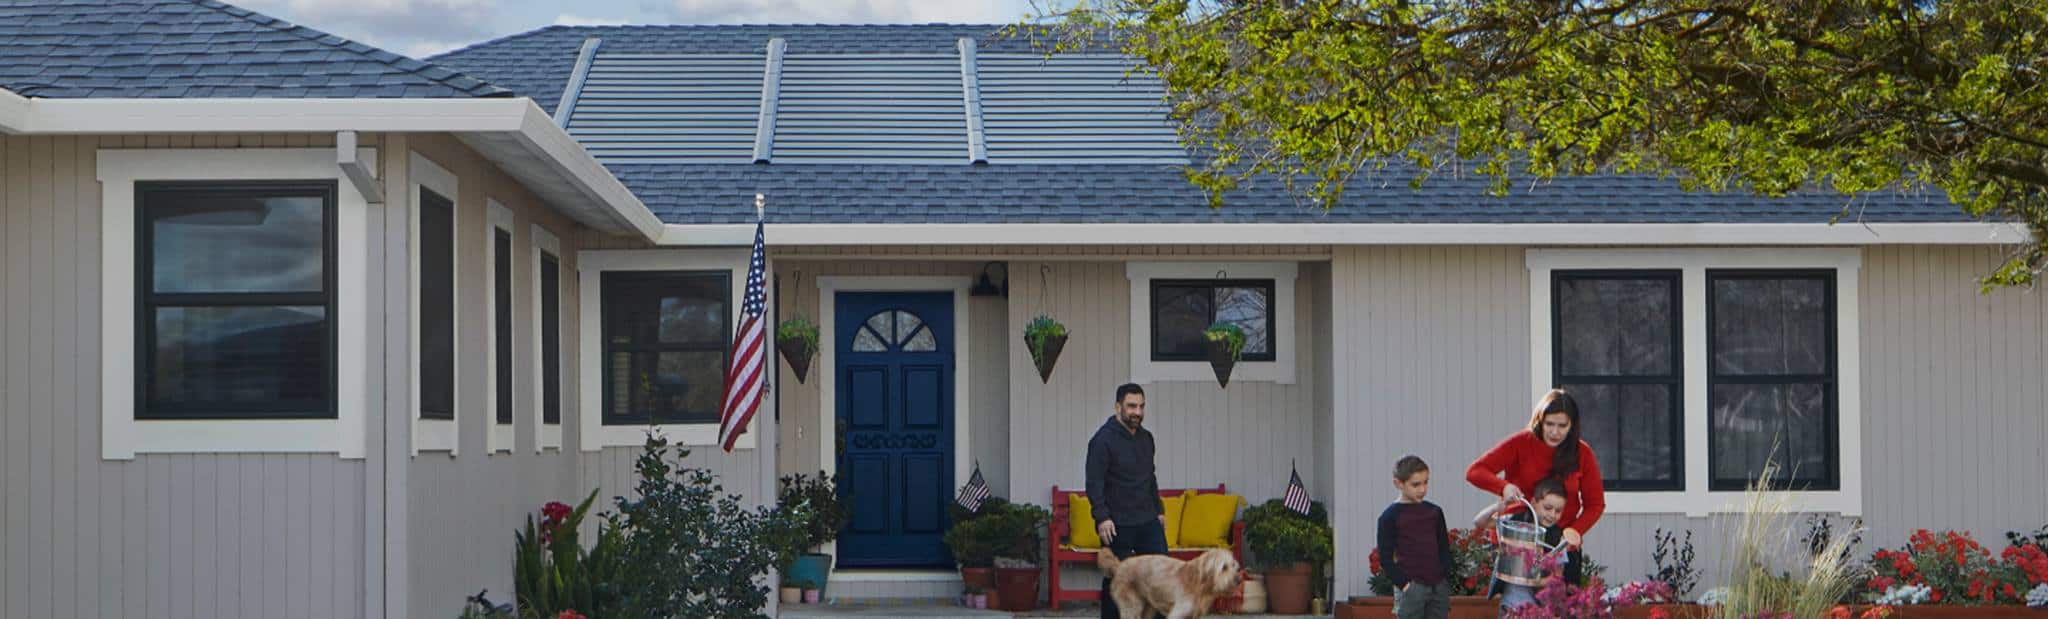 family outside their home featuring solar roof panels